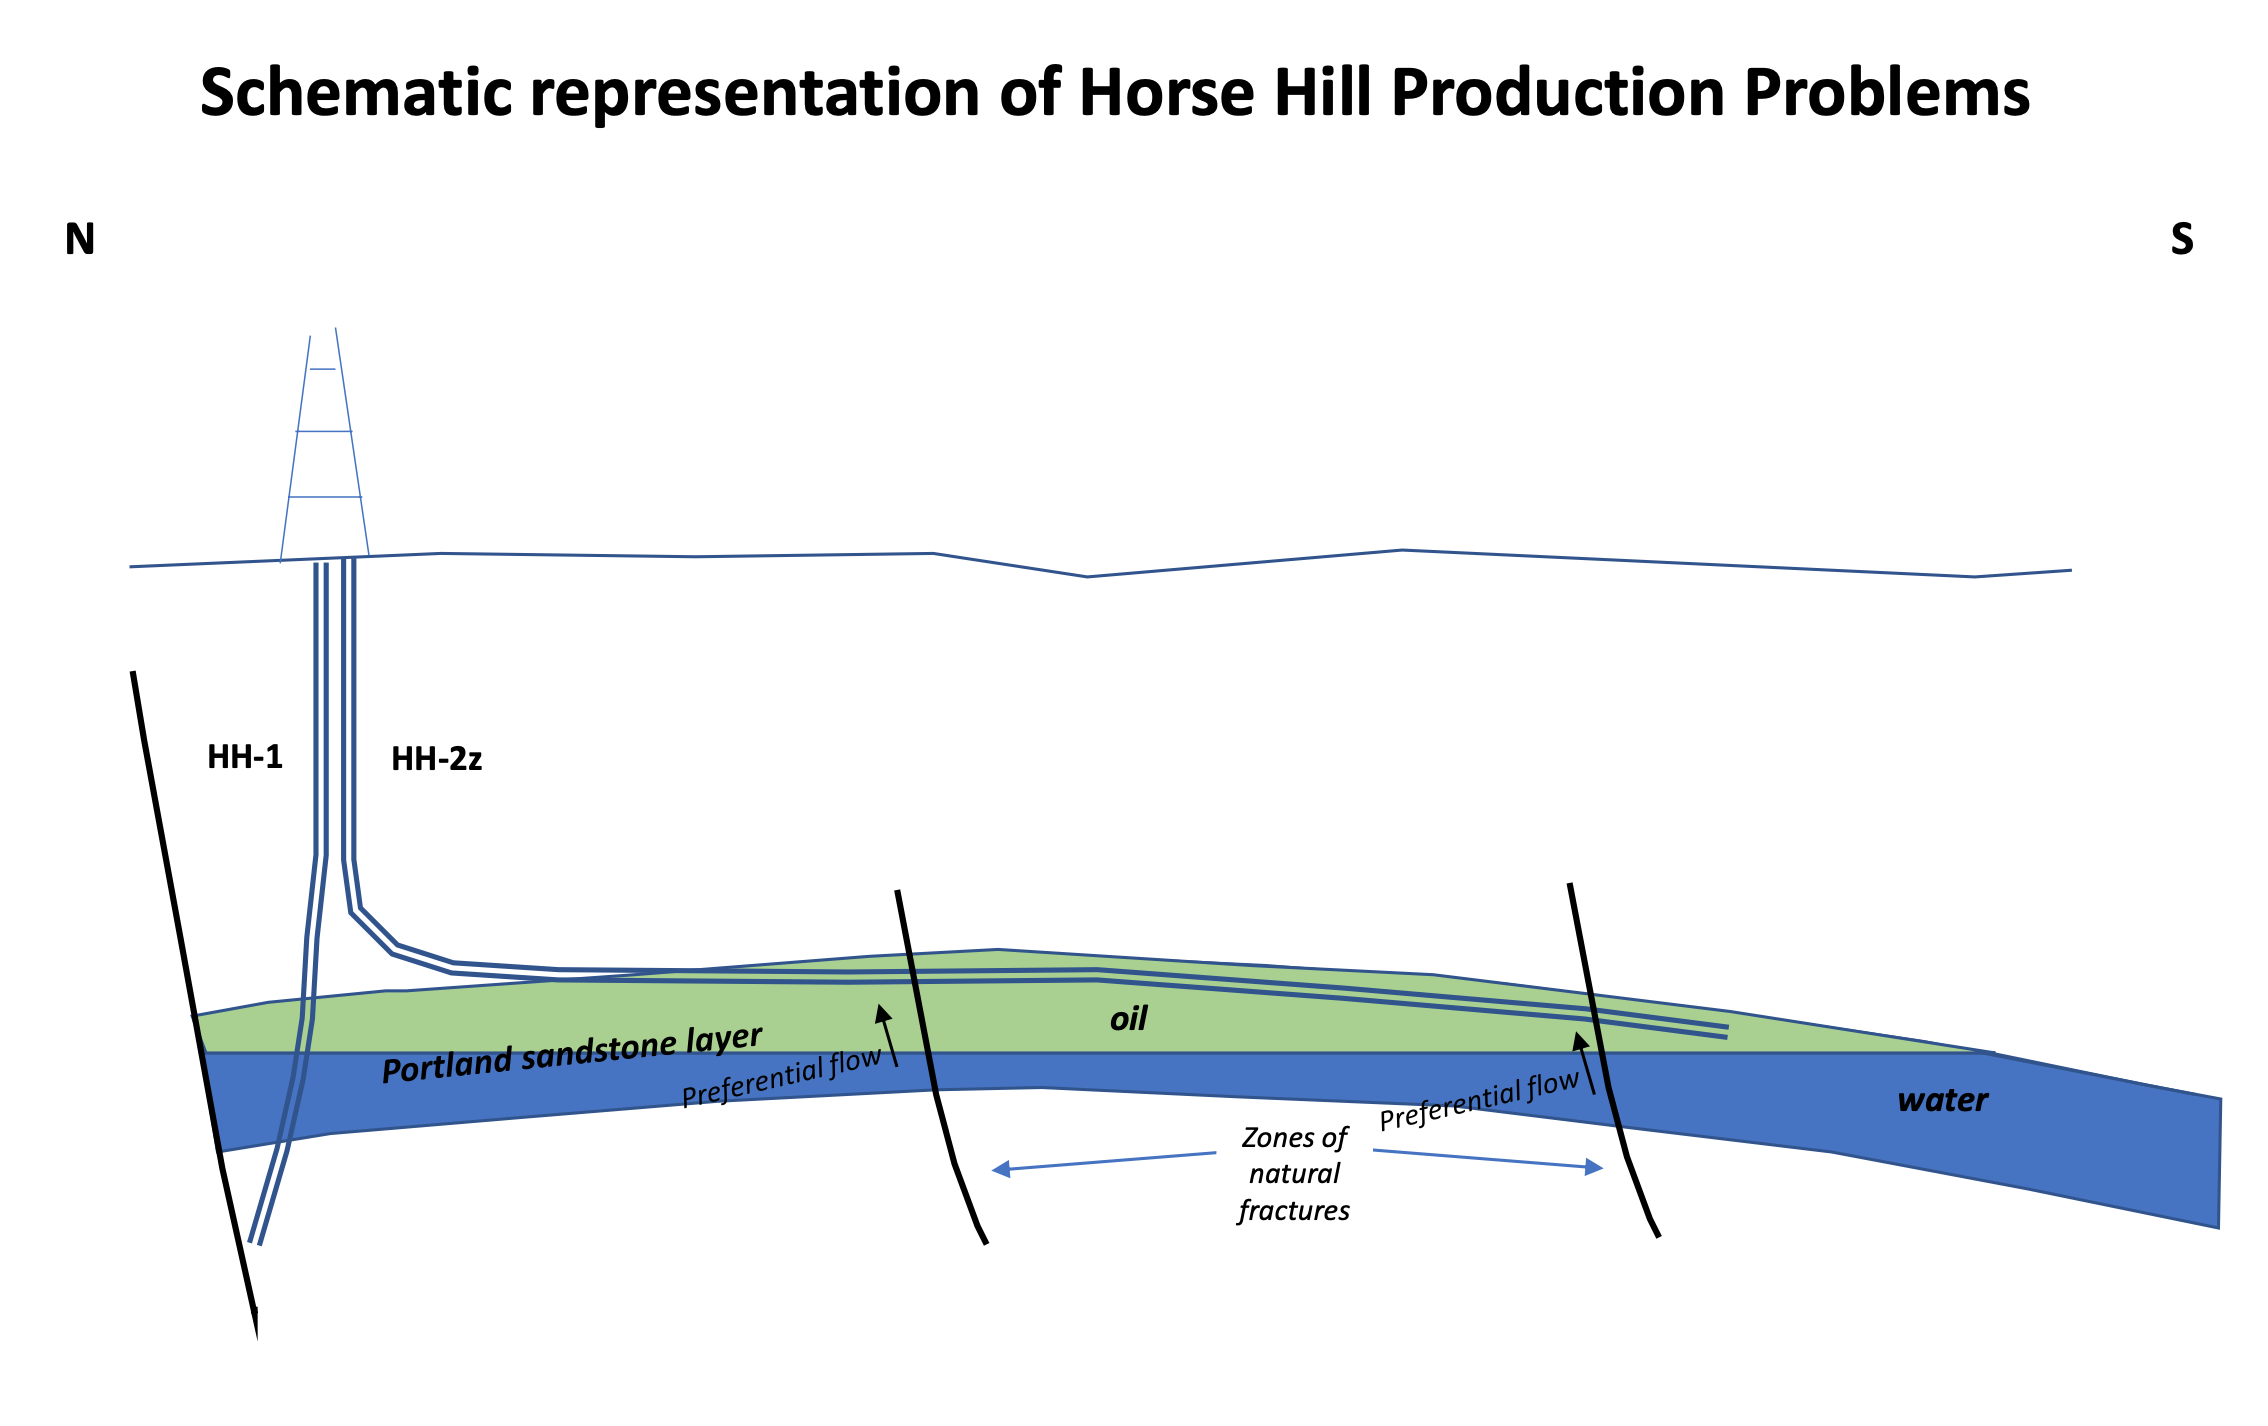 So what are the problems at Horse Hill?